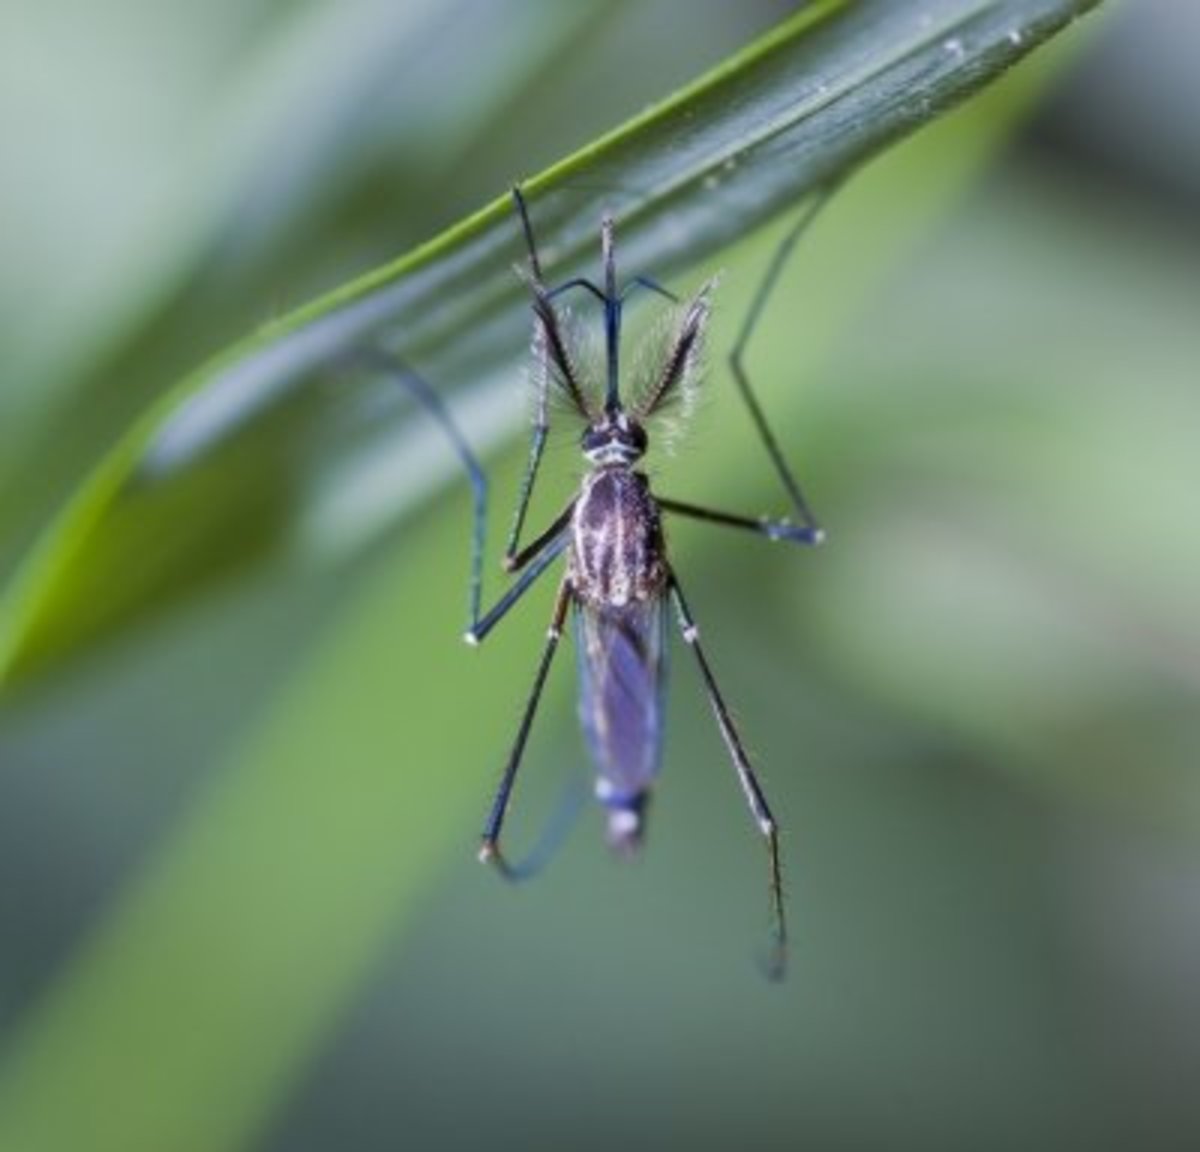 Mosquitoes carry disease and are small but deadly insects. There are over 2500 species of mosquitoes with over 150 different ones in the United States alone.